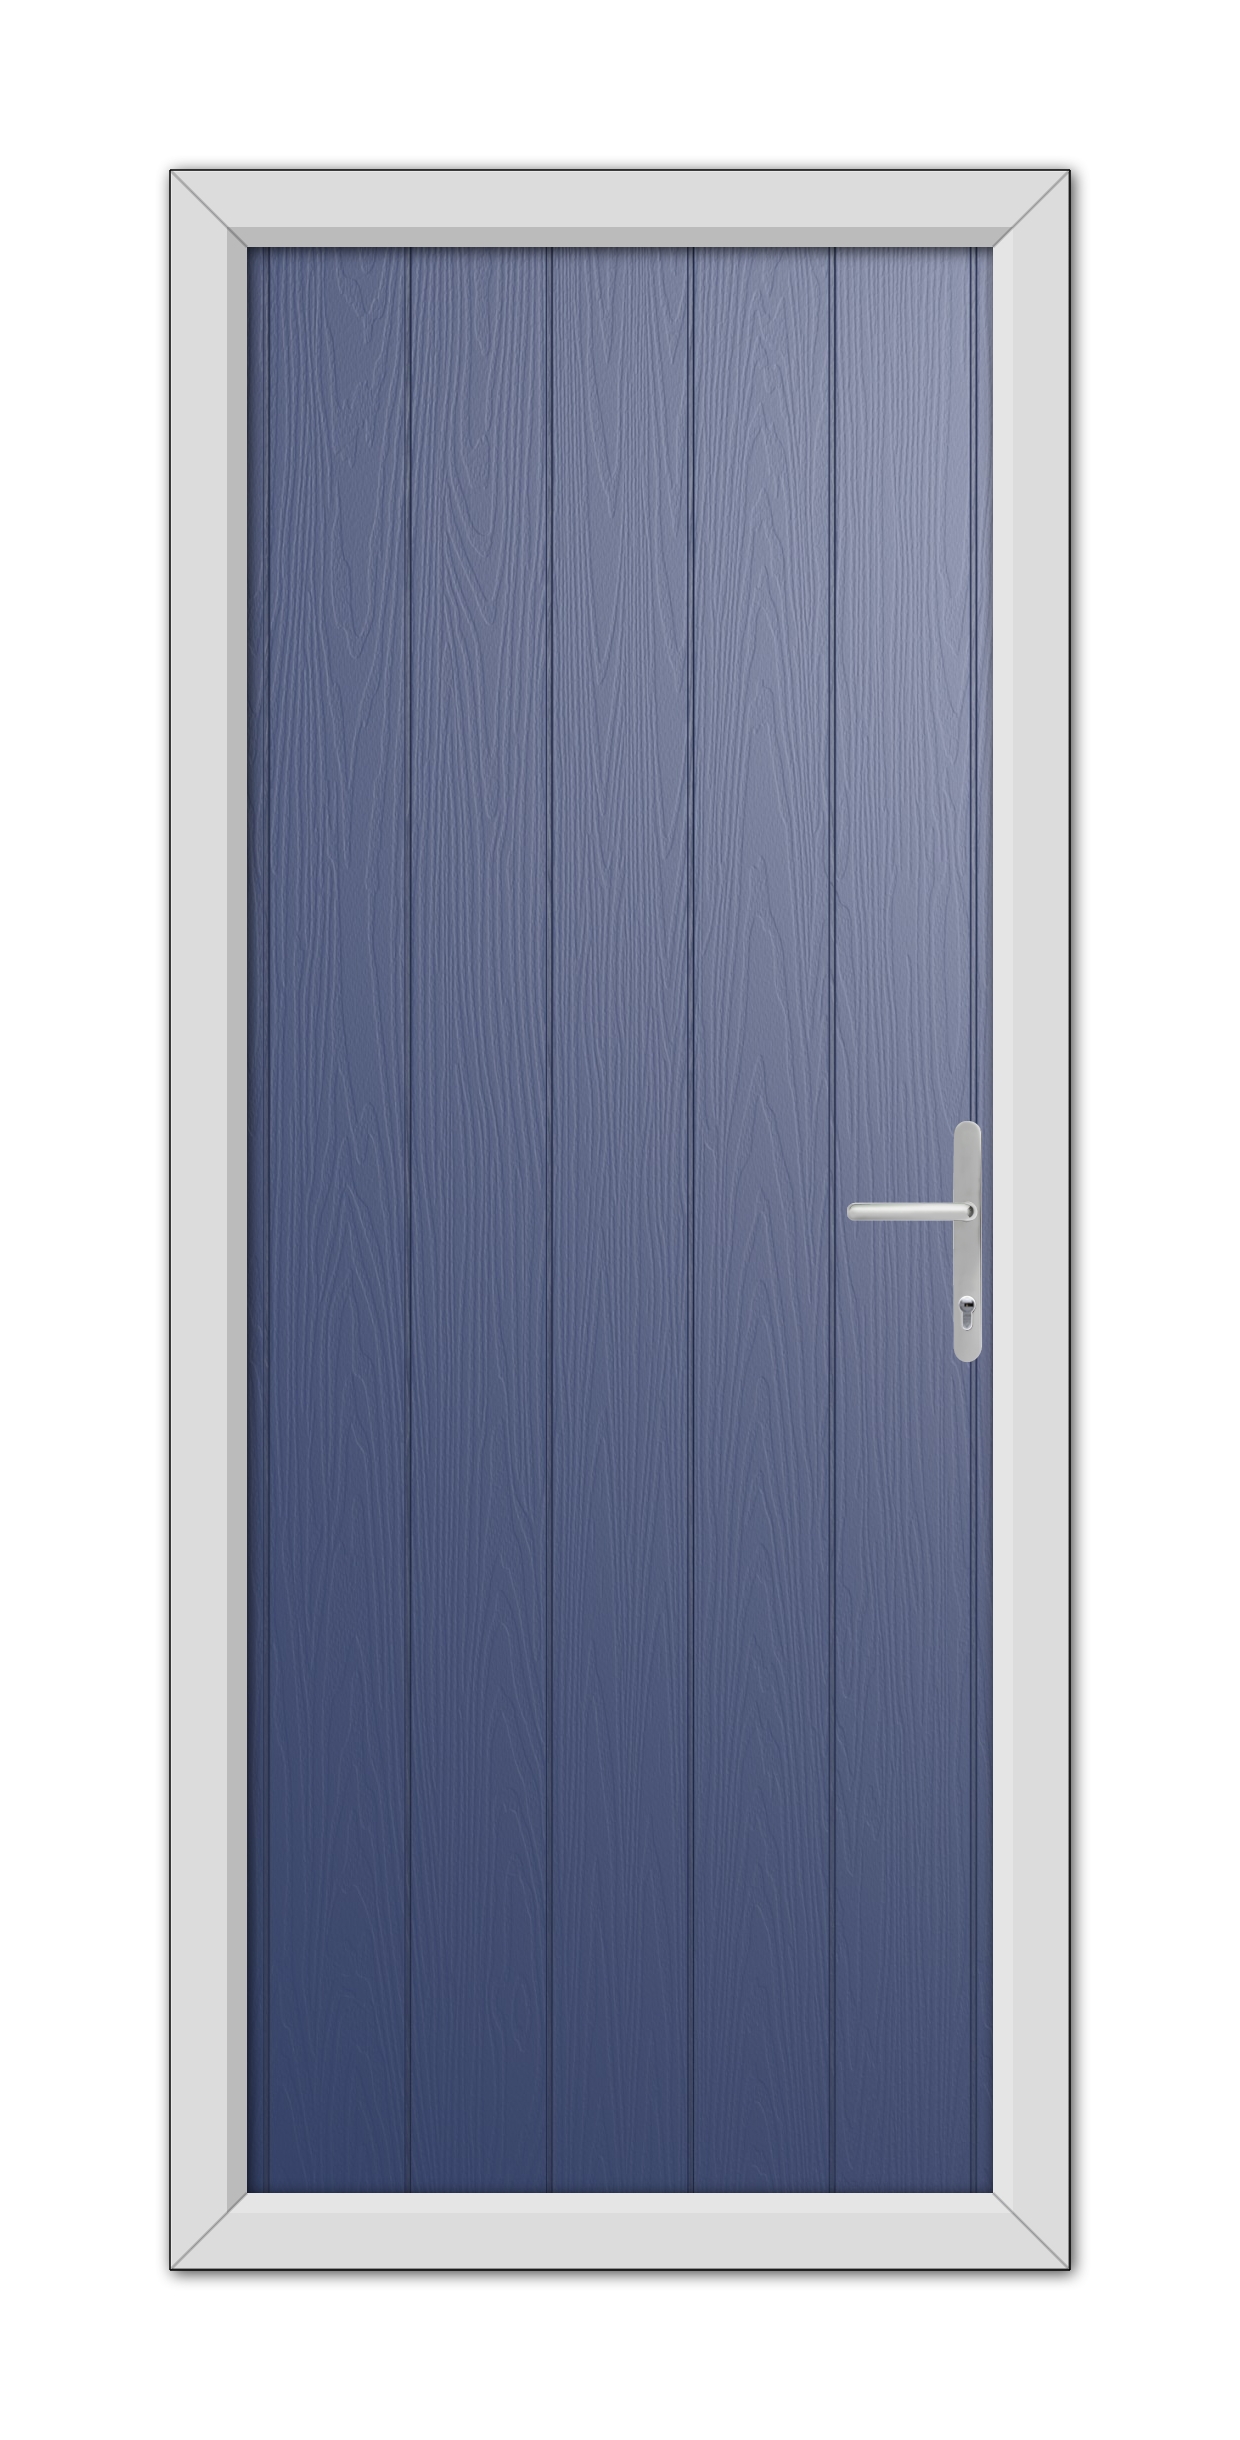 A Blue Gloucester Composite Door 48mm Timber Core with a silver handle, set within a white door frame, depicted in a realistic style.